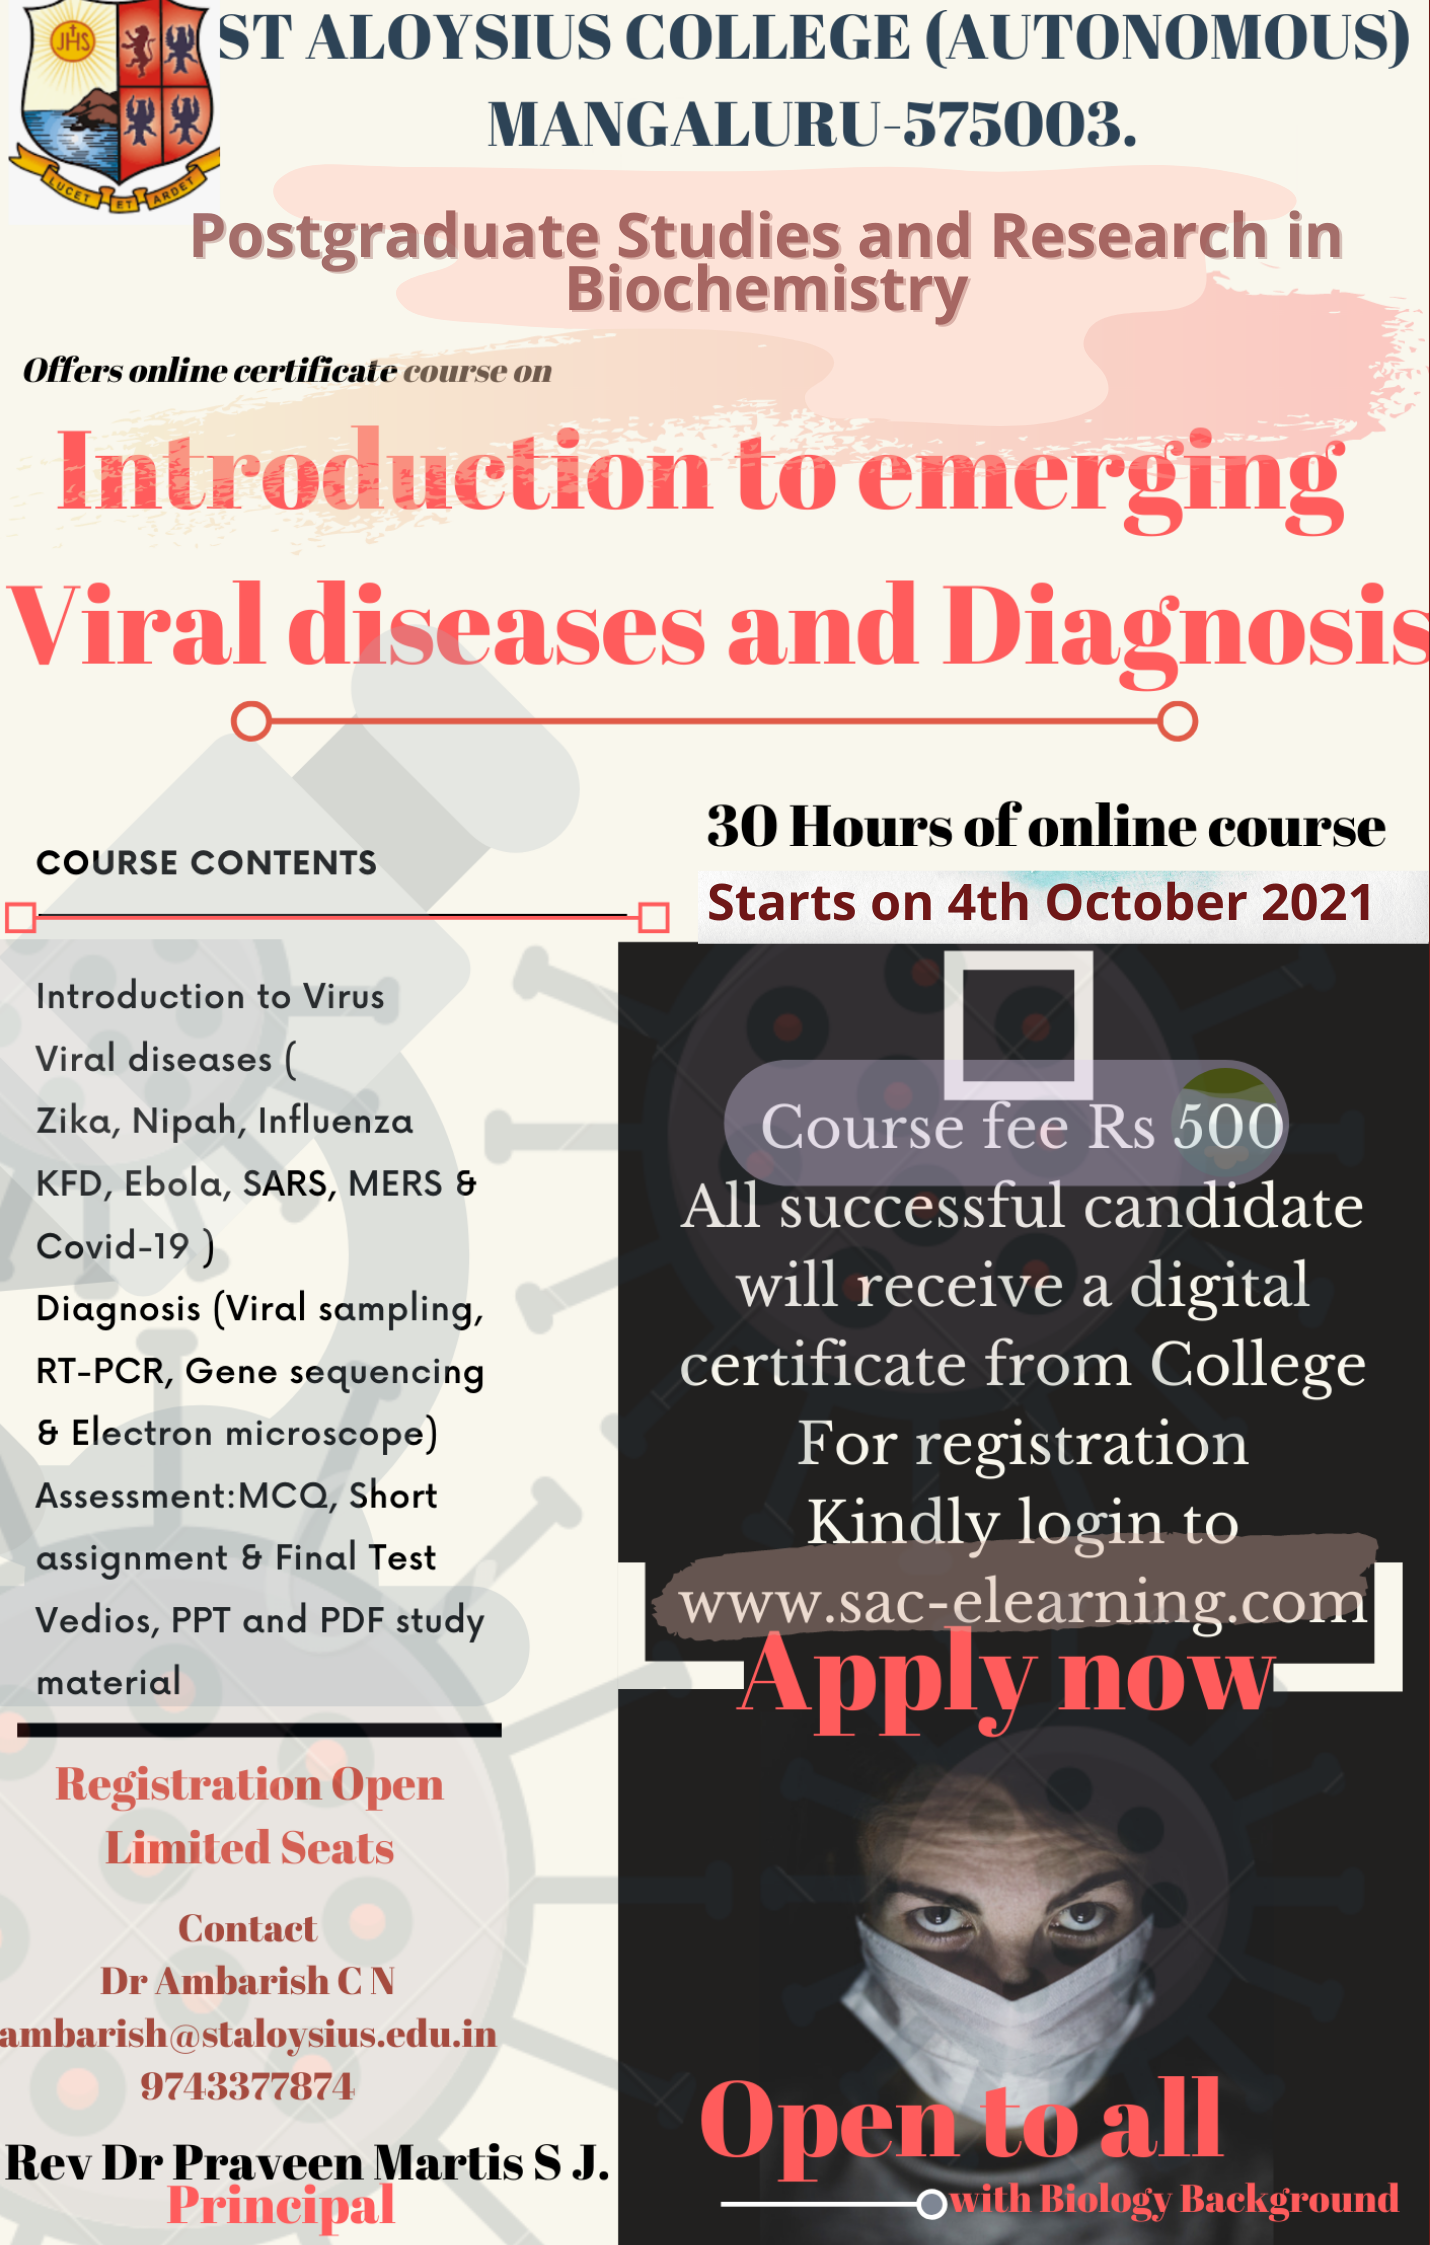 Introduction to emerging viral diseases and diagnosis